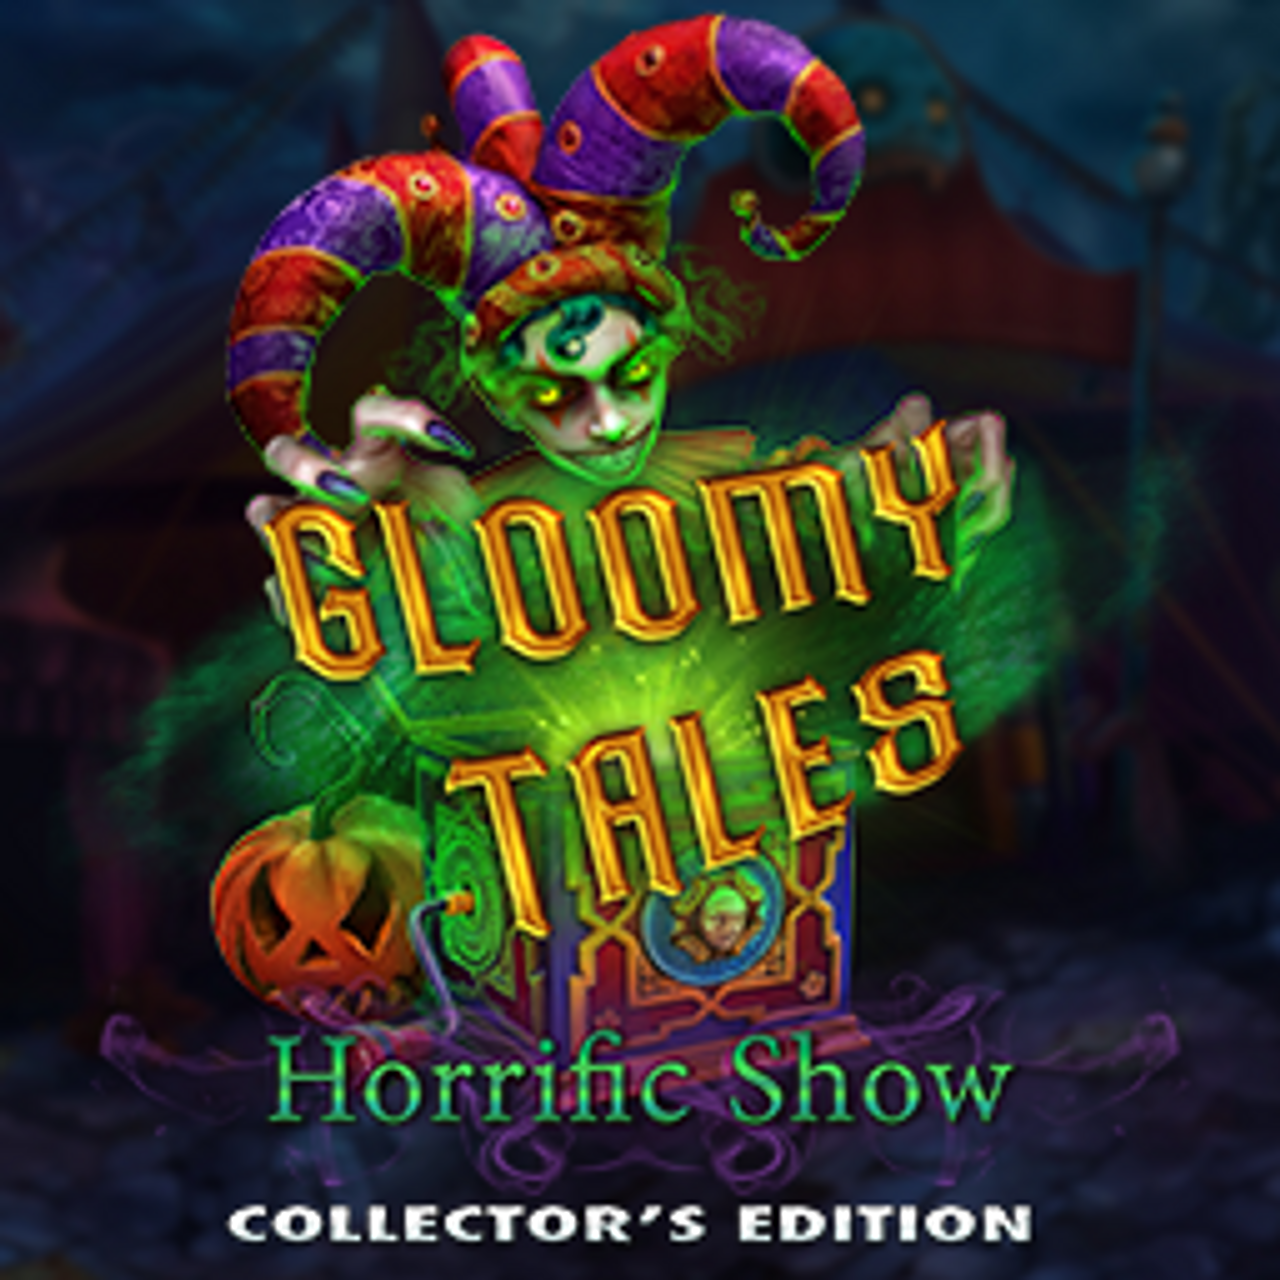 Gloomy Tales: Horrific Show Collector's Edition